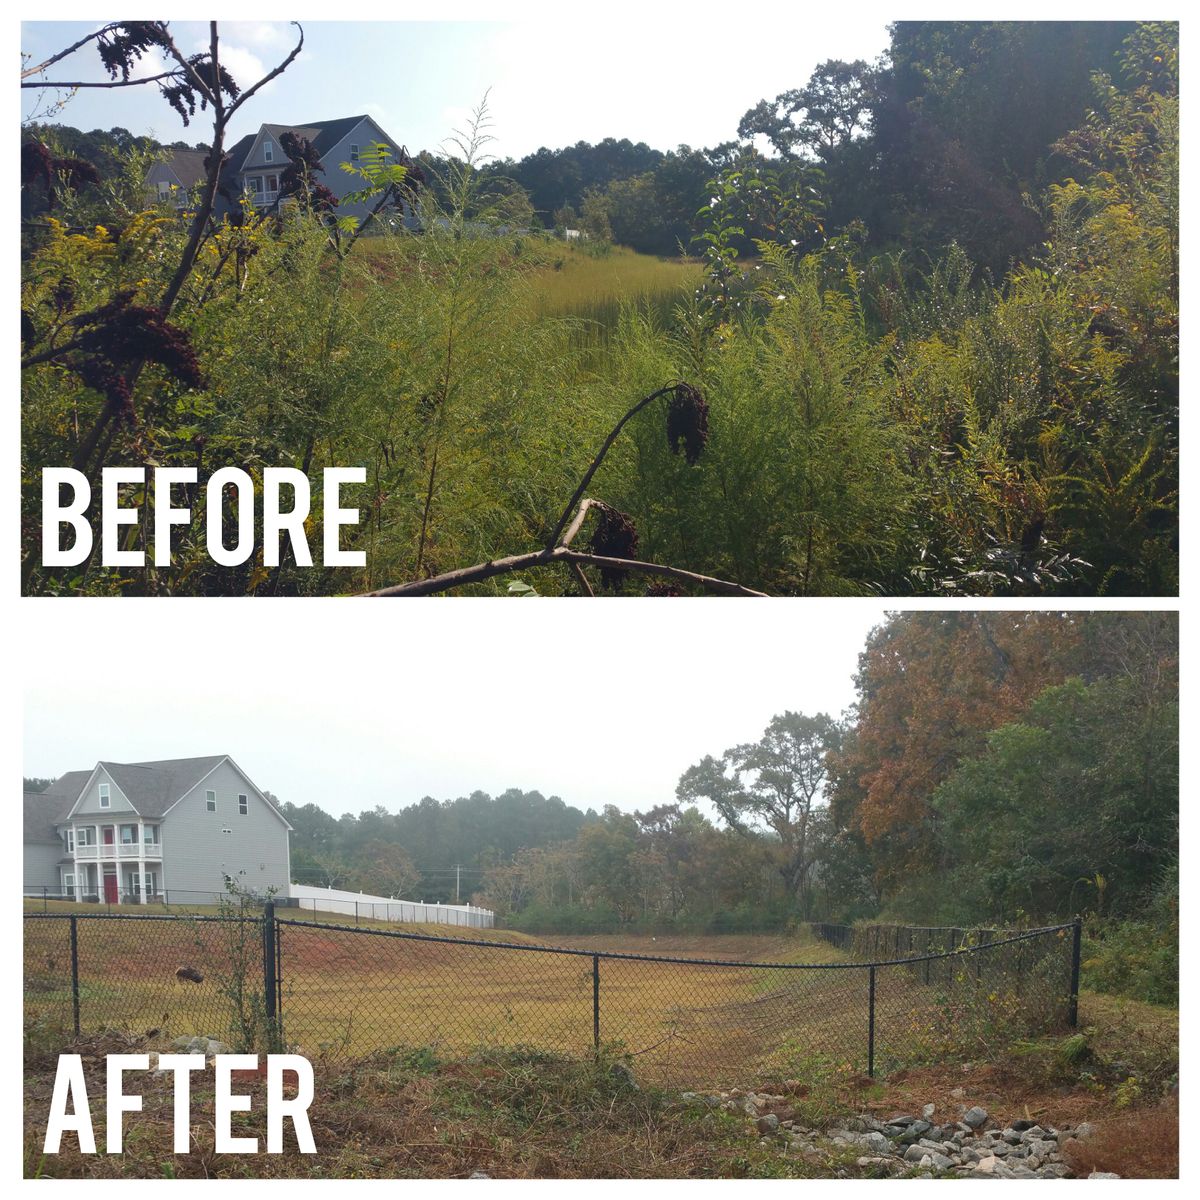 Fence Line Maintenance for Fayette Property Solutions in Fayetteville, GA